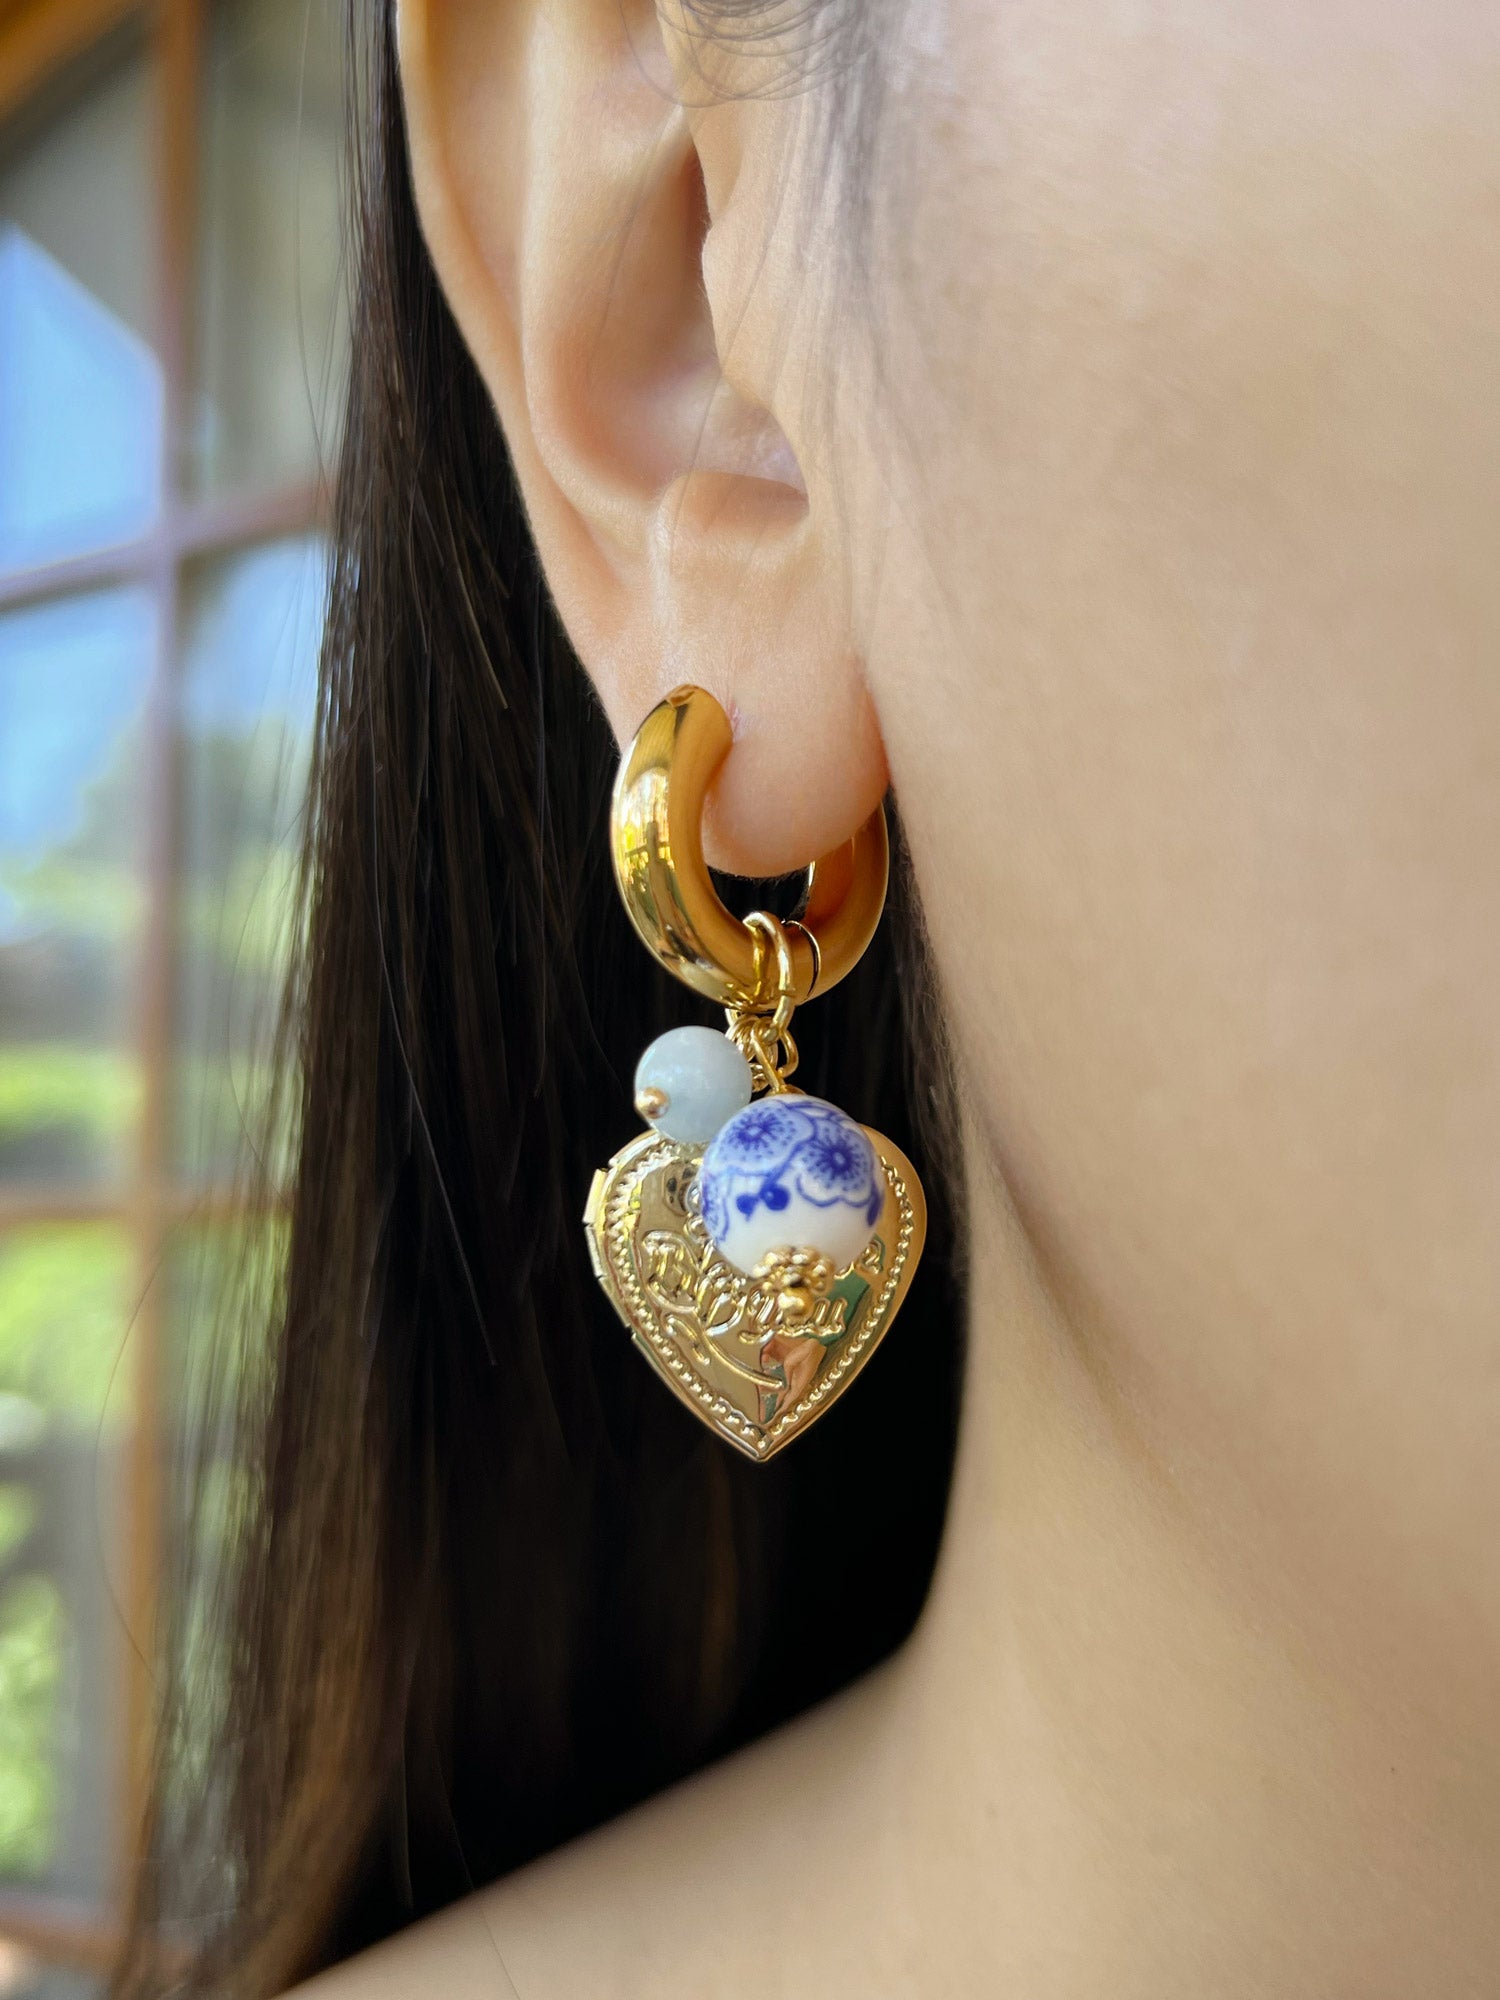 Chunky Heart Locket Hoops - An Eclectic Cup of Tea/Blue Stones